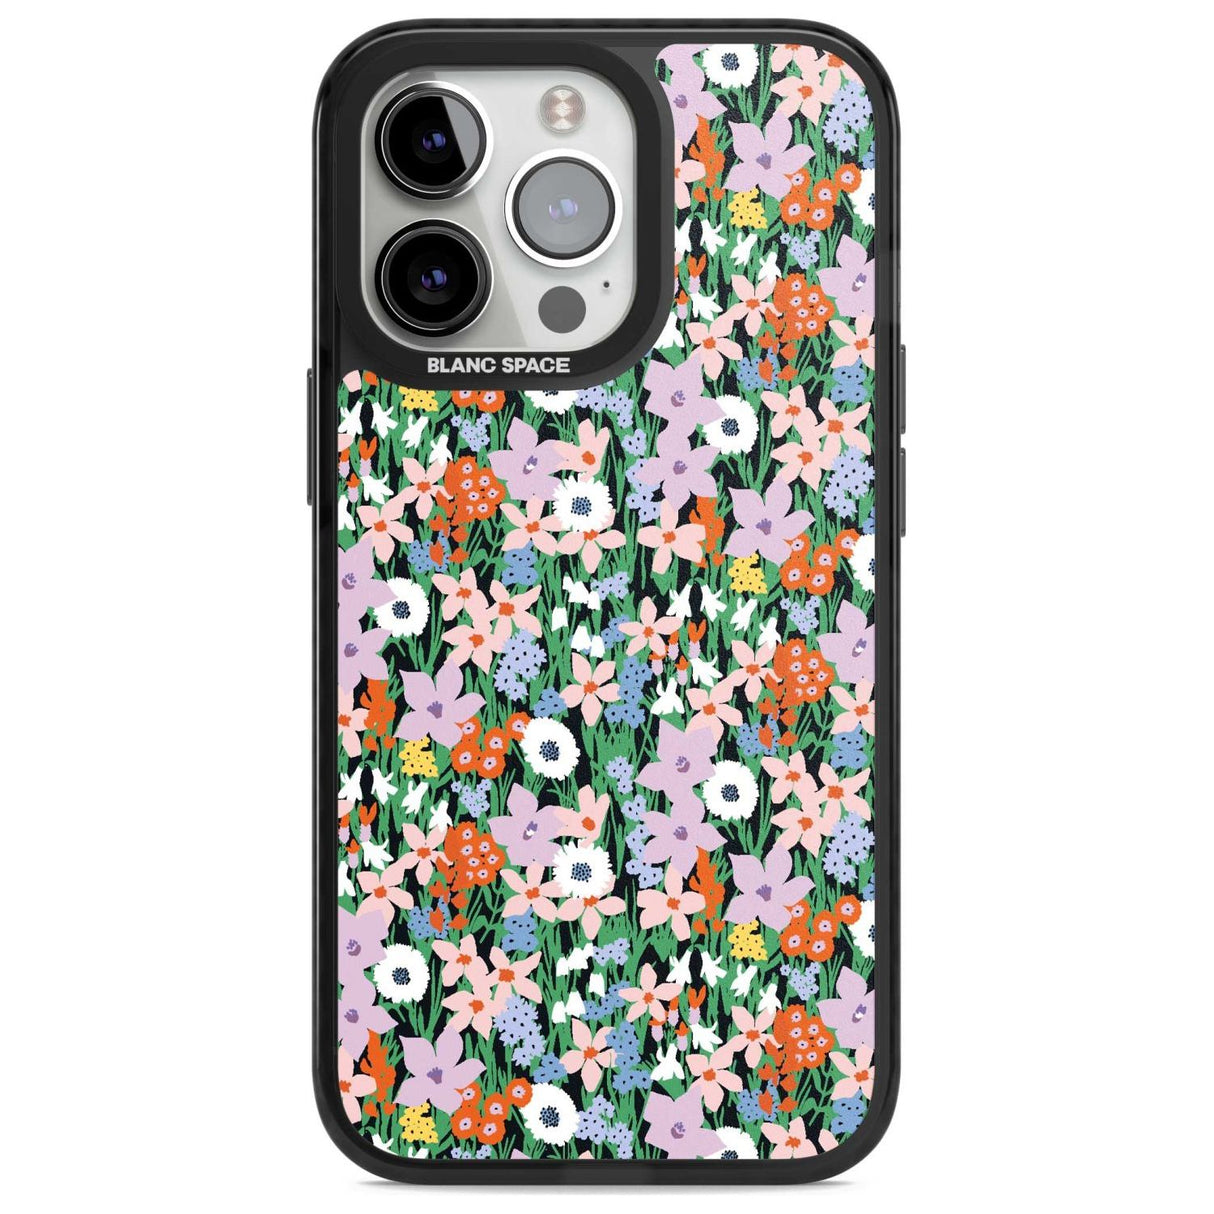 Jazzy Floral Mix: Solid Phone Case iPhone 15 Pro Max / Magsafe Black Impact Case,iPhone 15 Pro / Magsafe Black Impact Case,iPhone 14 Pro Max / Magsafe Black Impact Case,iPhone 14 Pro / Magsafe Black Impact Case,iPhone 13 Pro / Magsafe Black Impact Case Blanc Space